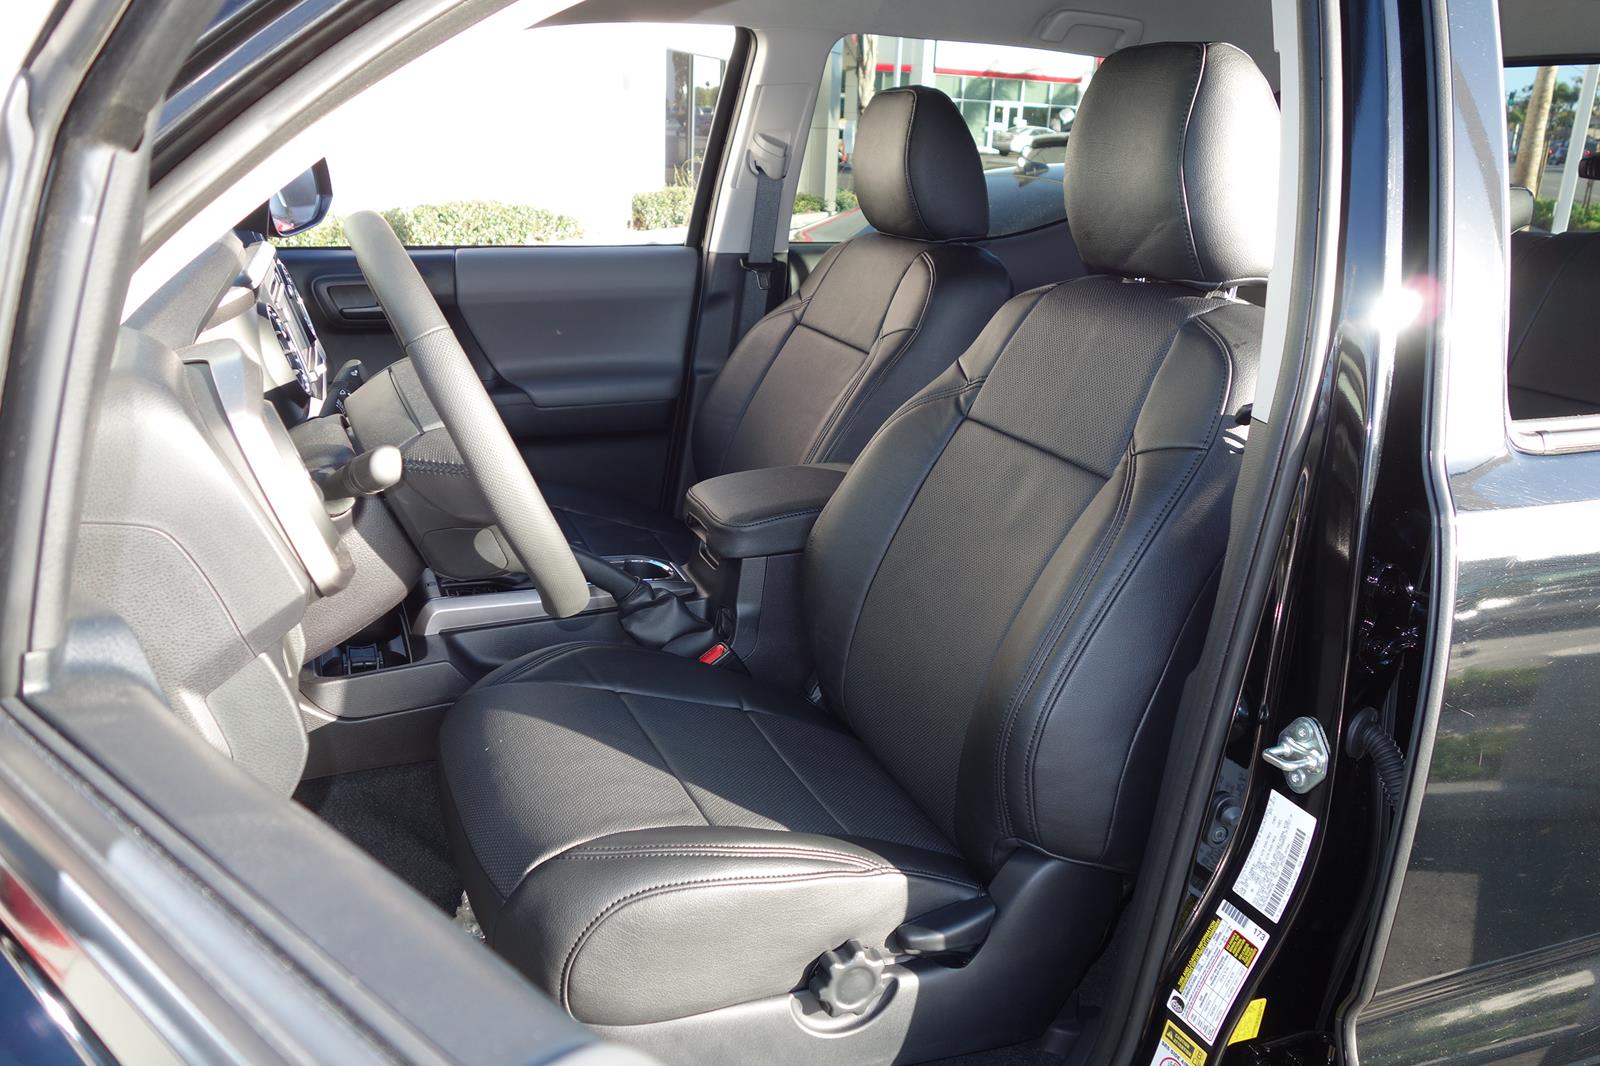 Toyota Tacoma 2016-2020+ Clazzio Seat Covers - The Best On The Market